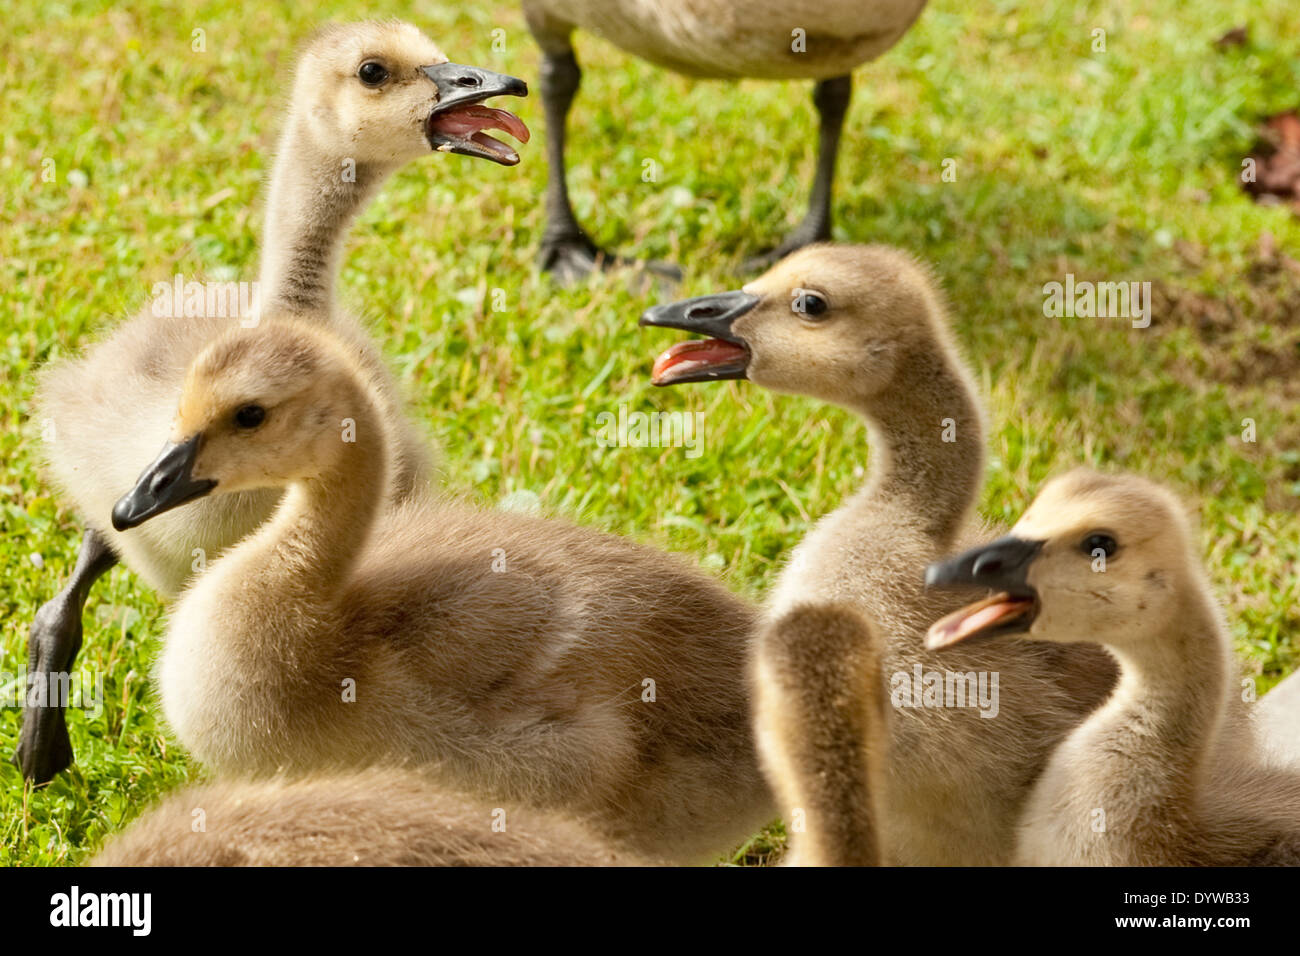 Juvenile Canadian Geese standing together with mouths open Stock Photo